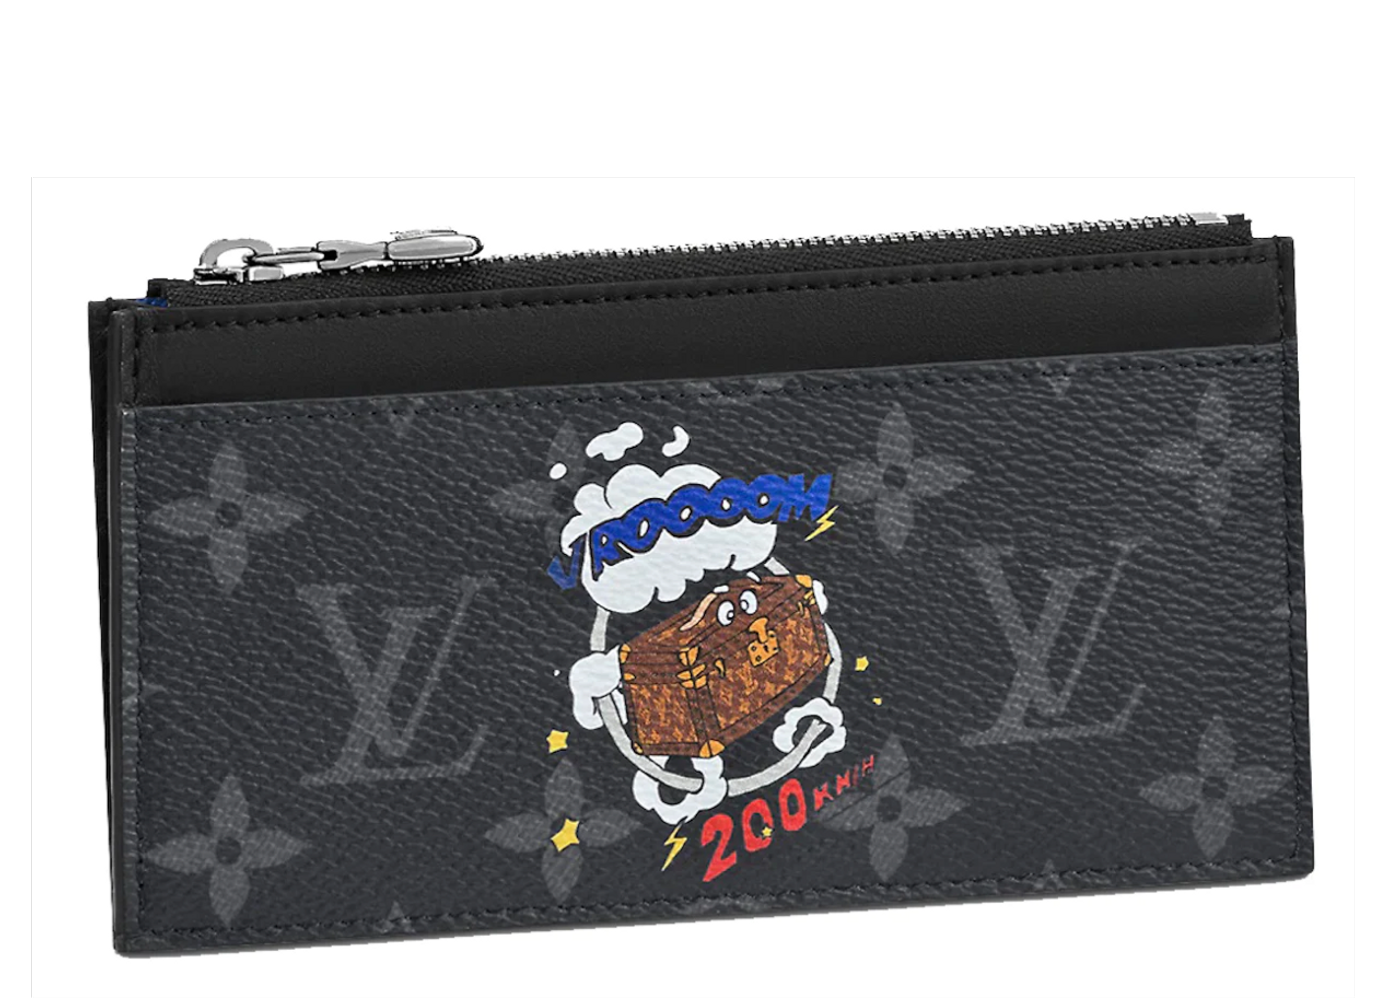 Louis Vuitton x Monopoly Customised Wallet